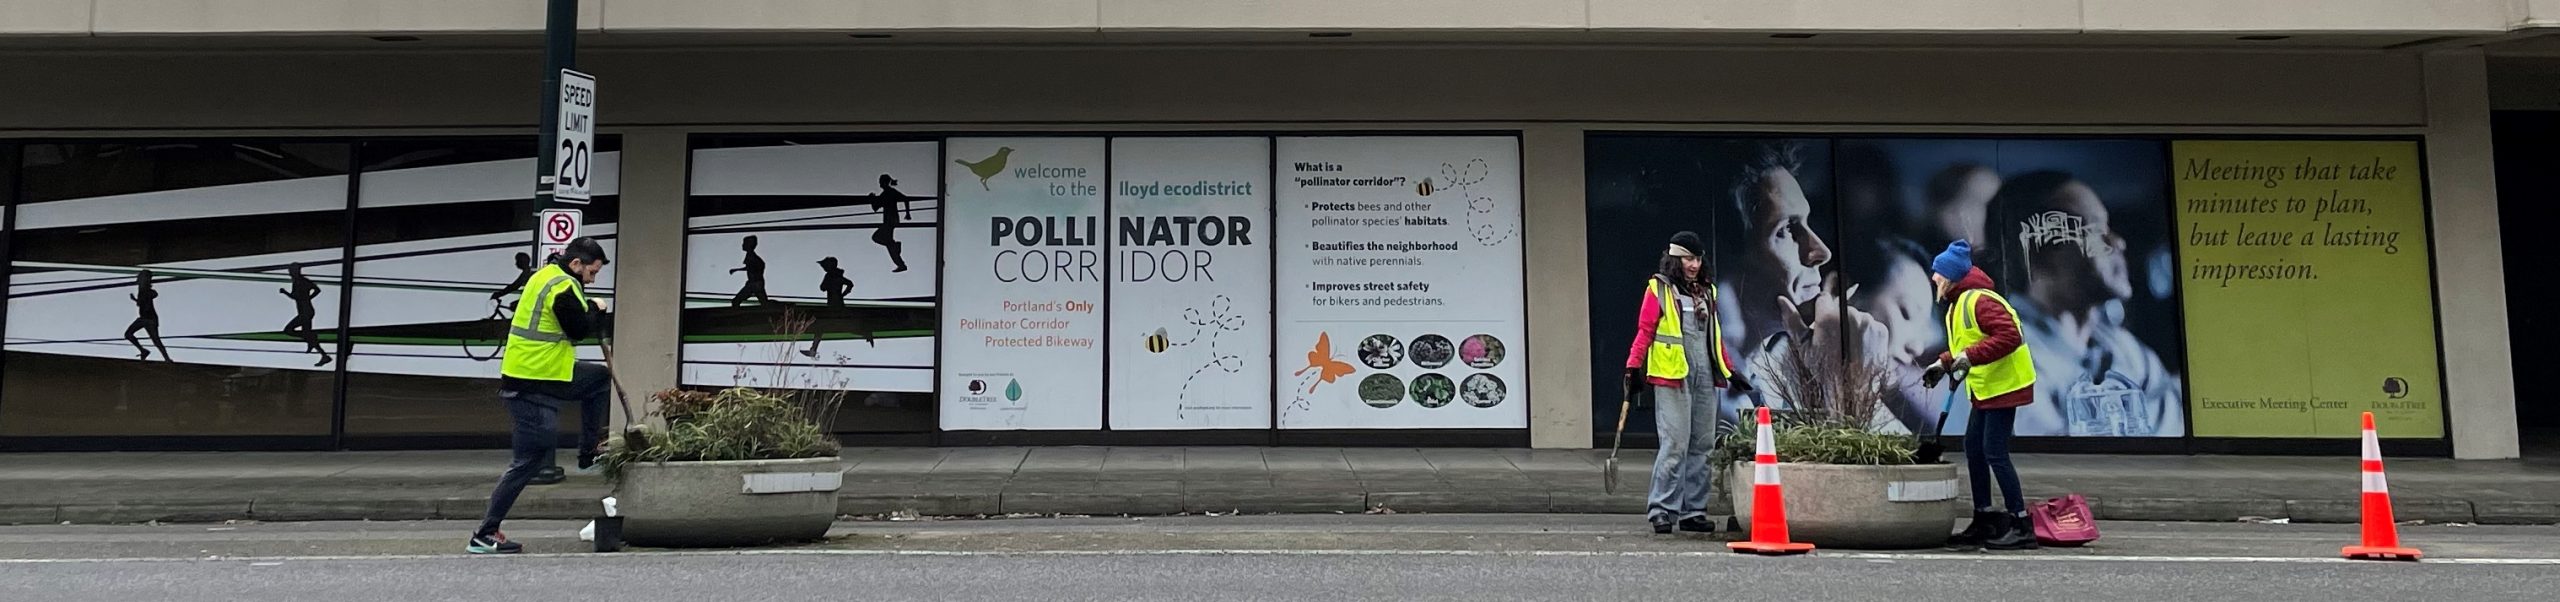 Three volunteers replanting two large planters in front of a window banner that says "Welcome to the Lloyd EcoDistrict Pollinator Corridor".